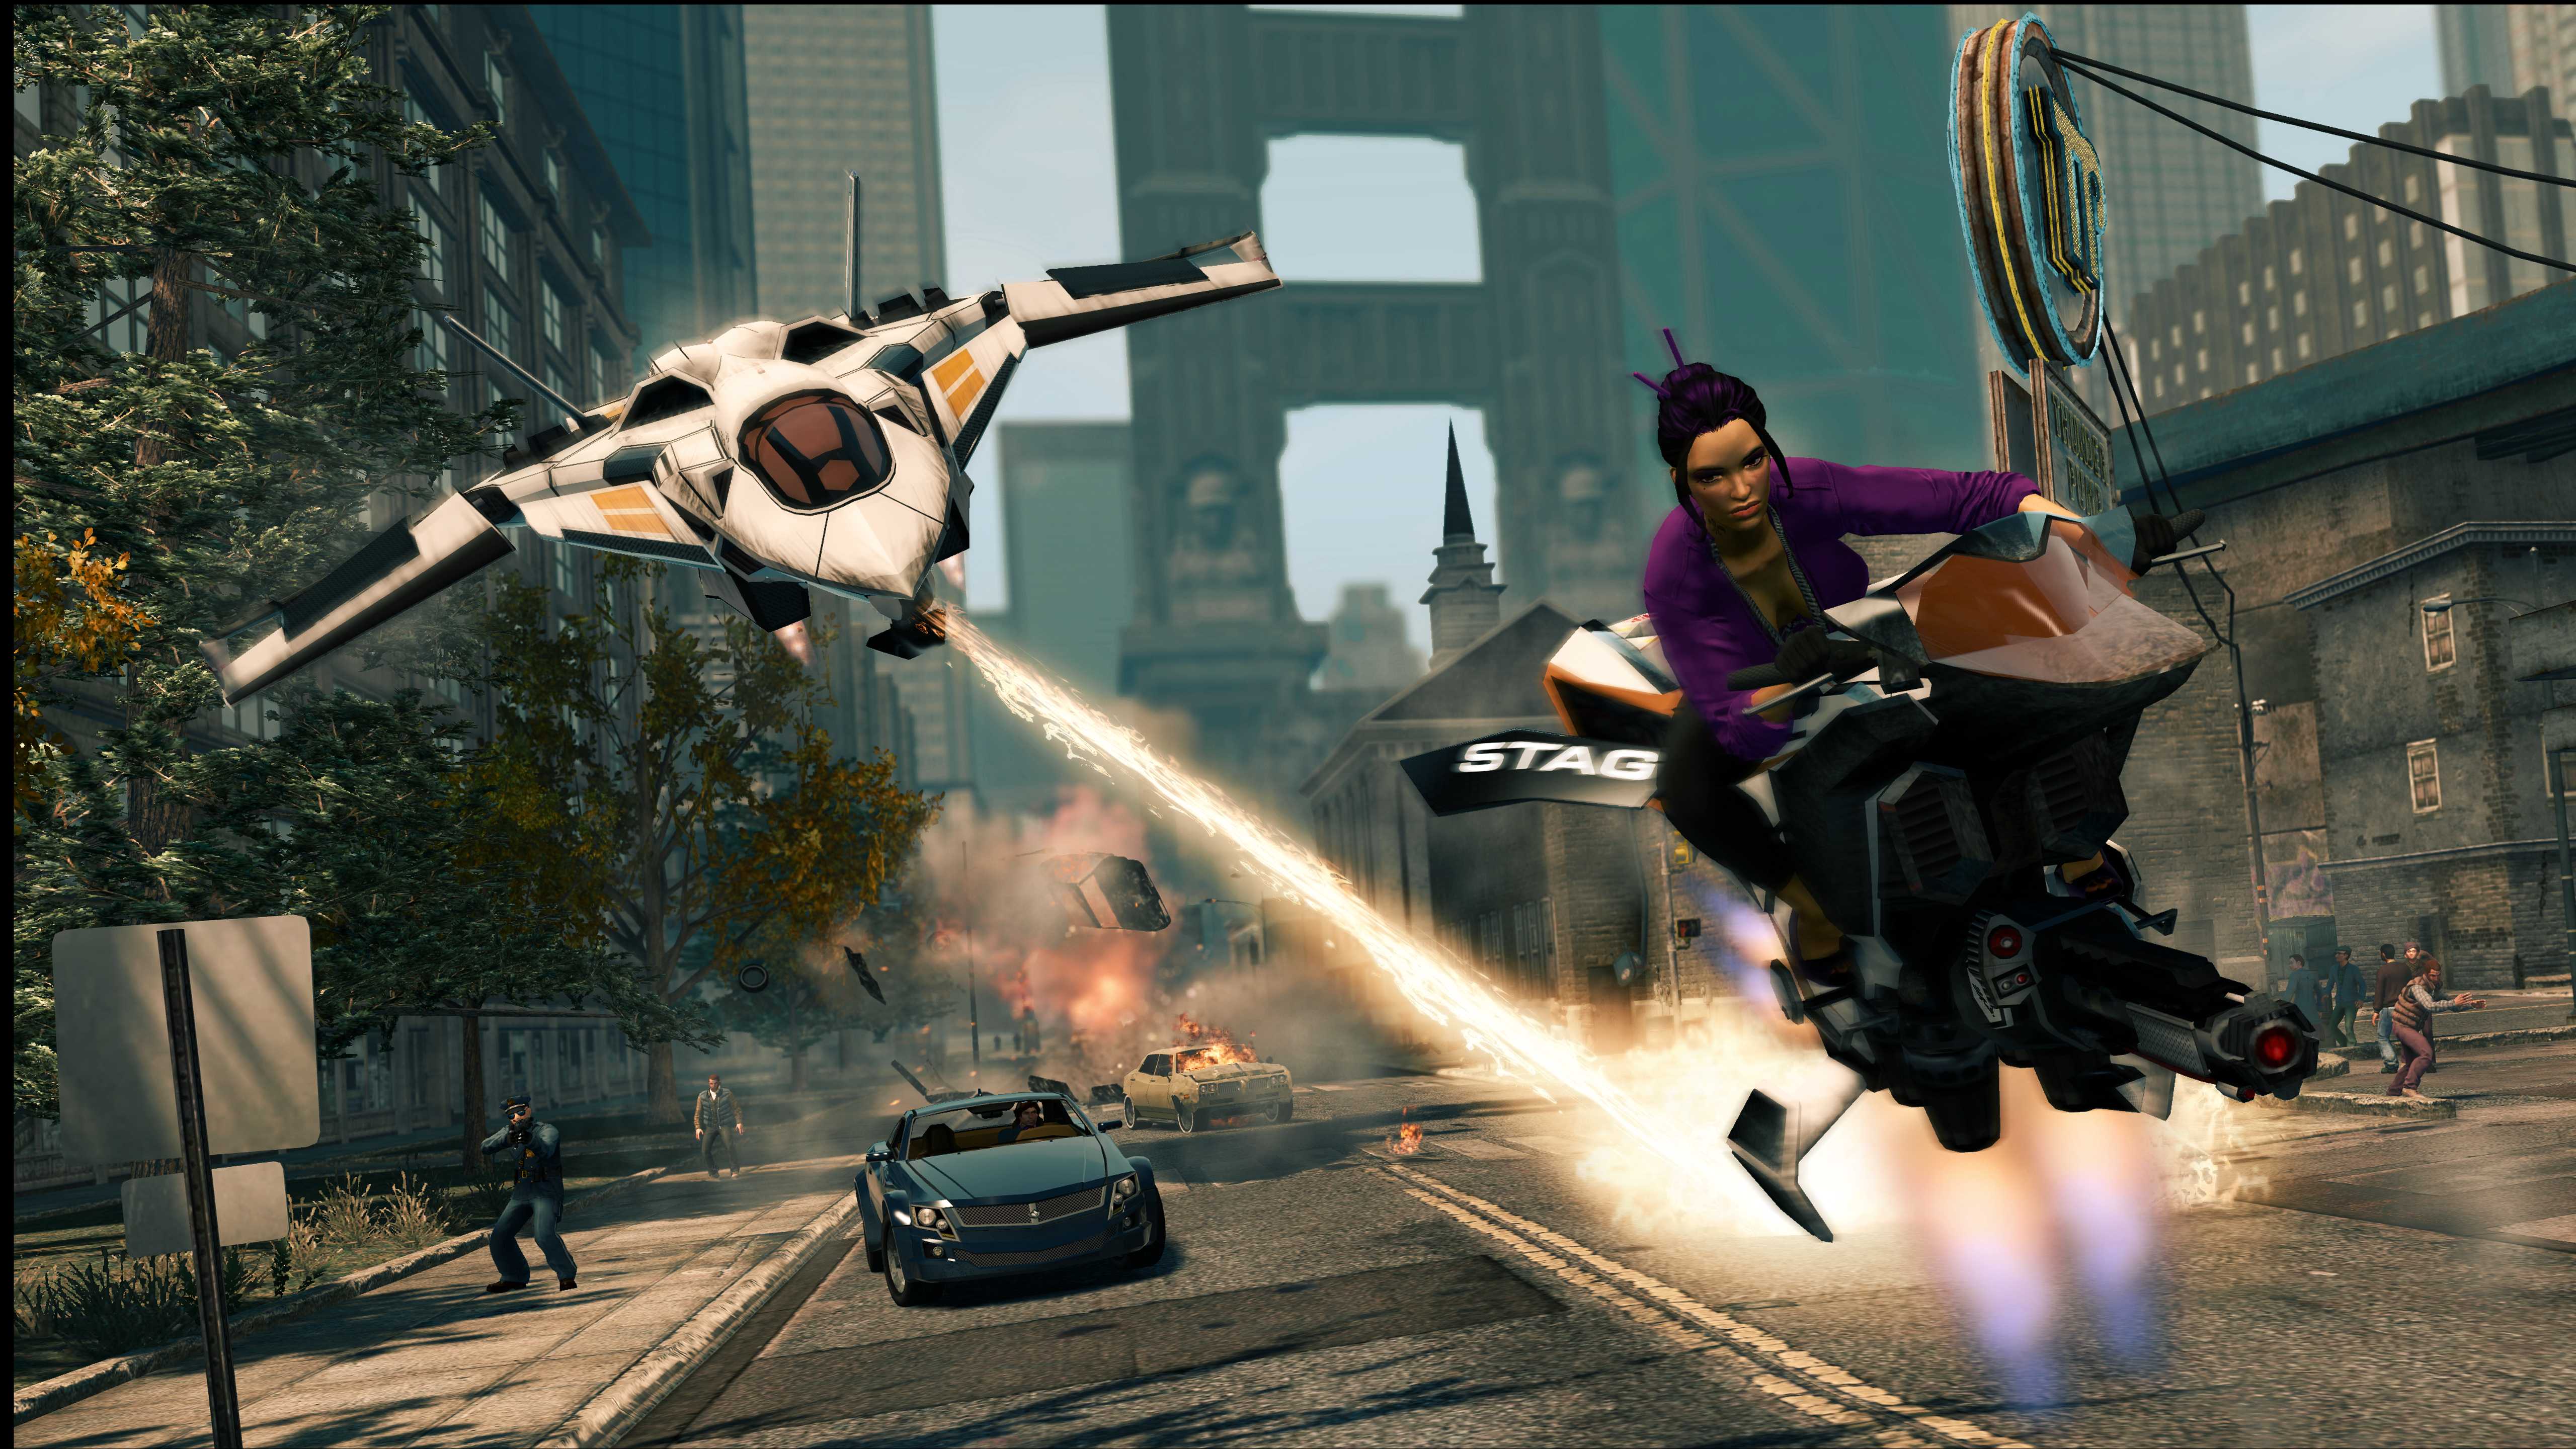 Saints Row: The Third Remastered - Part 1 - The Beginning 